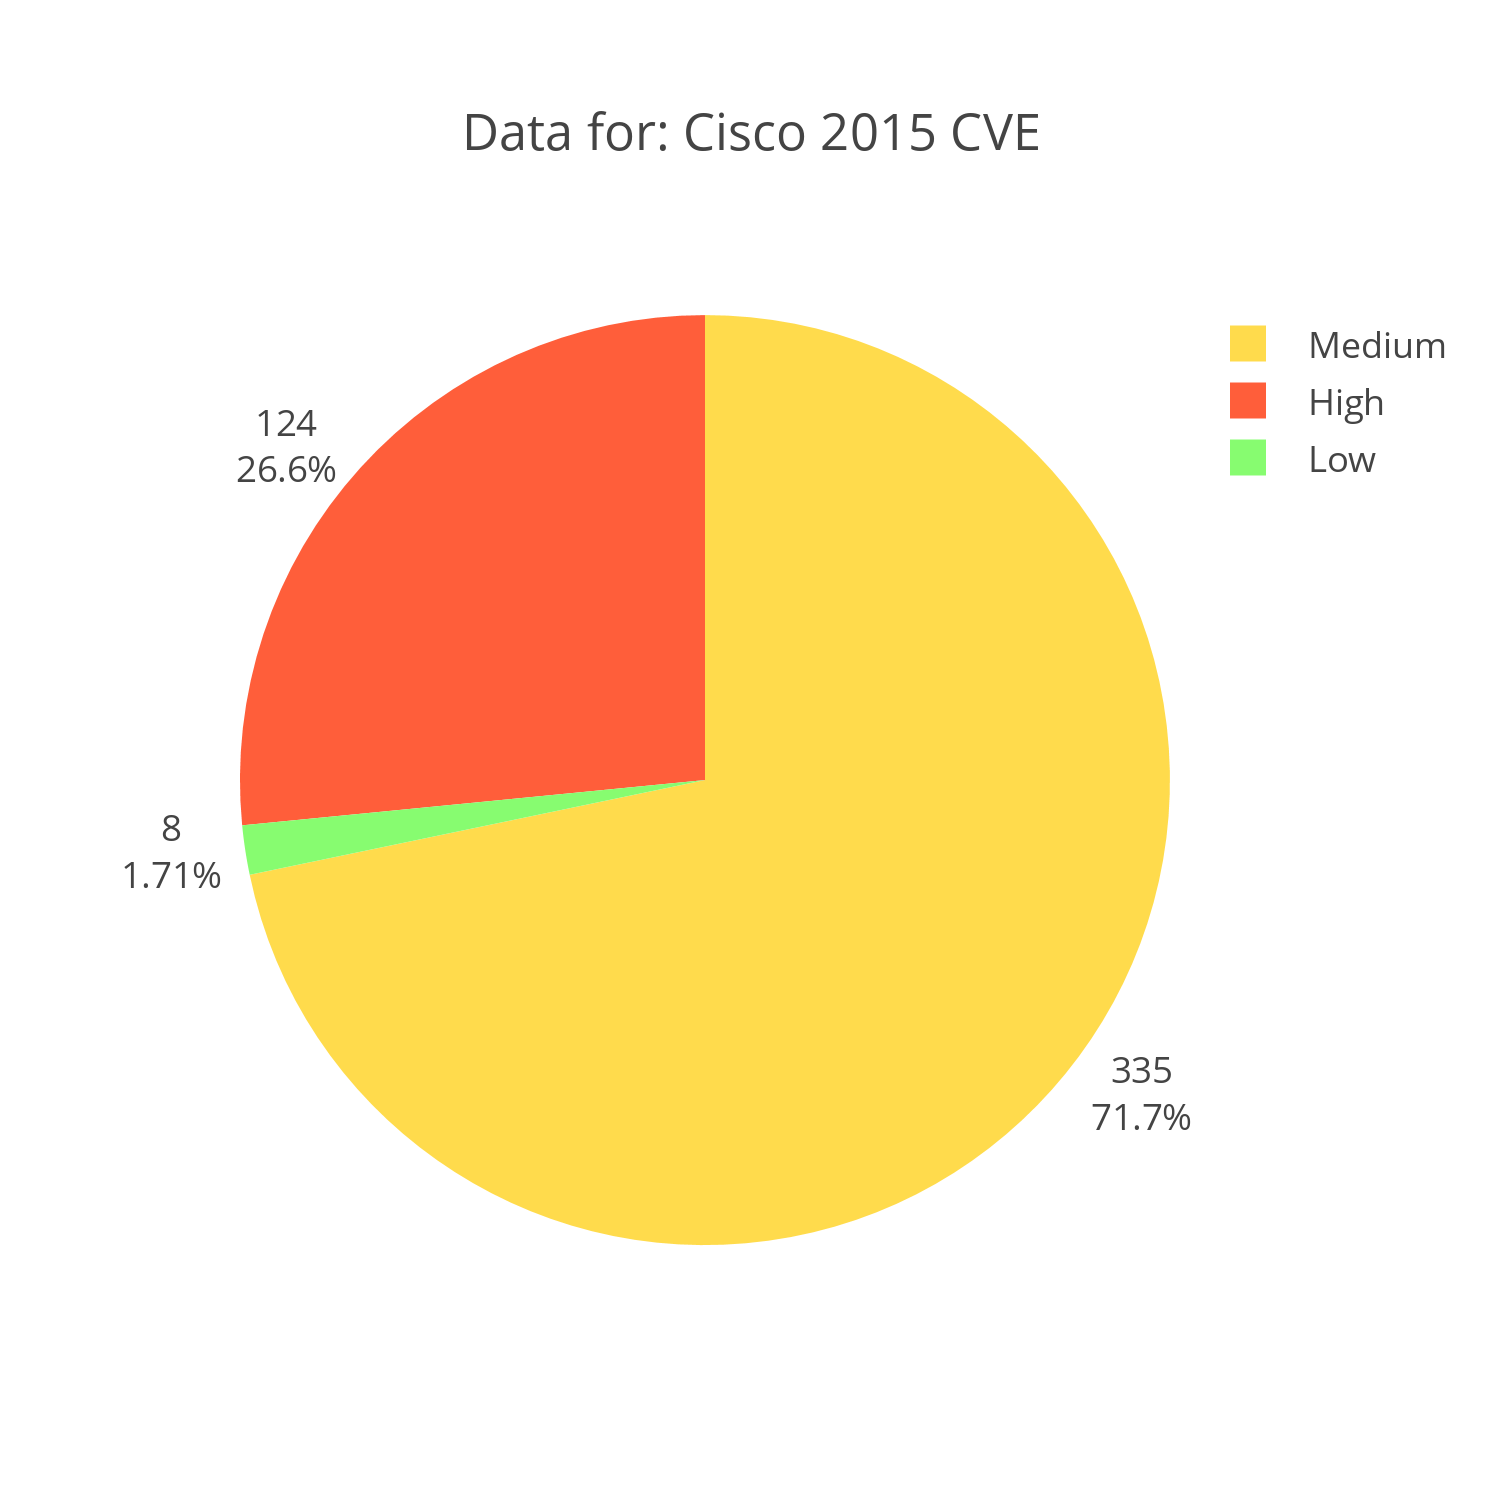 Cisco CVE reports for 2015 distributed by severity